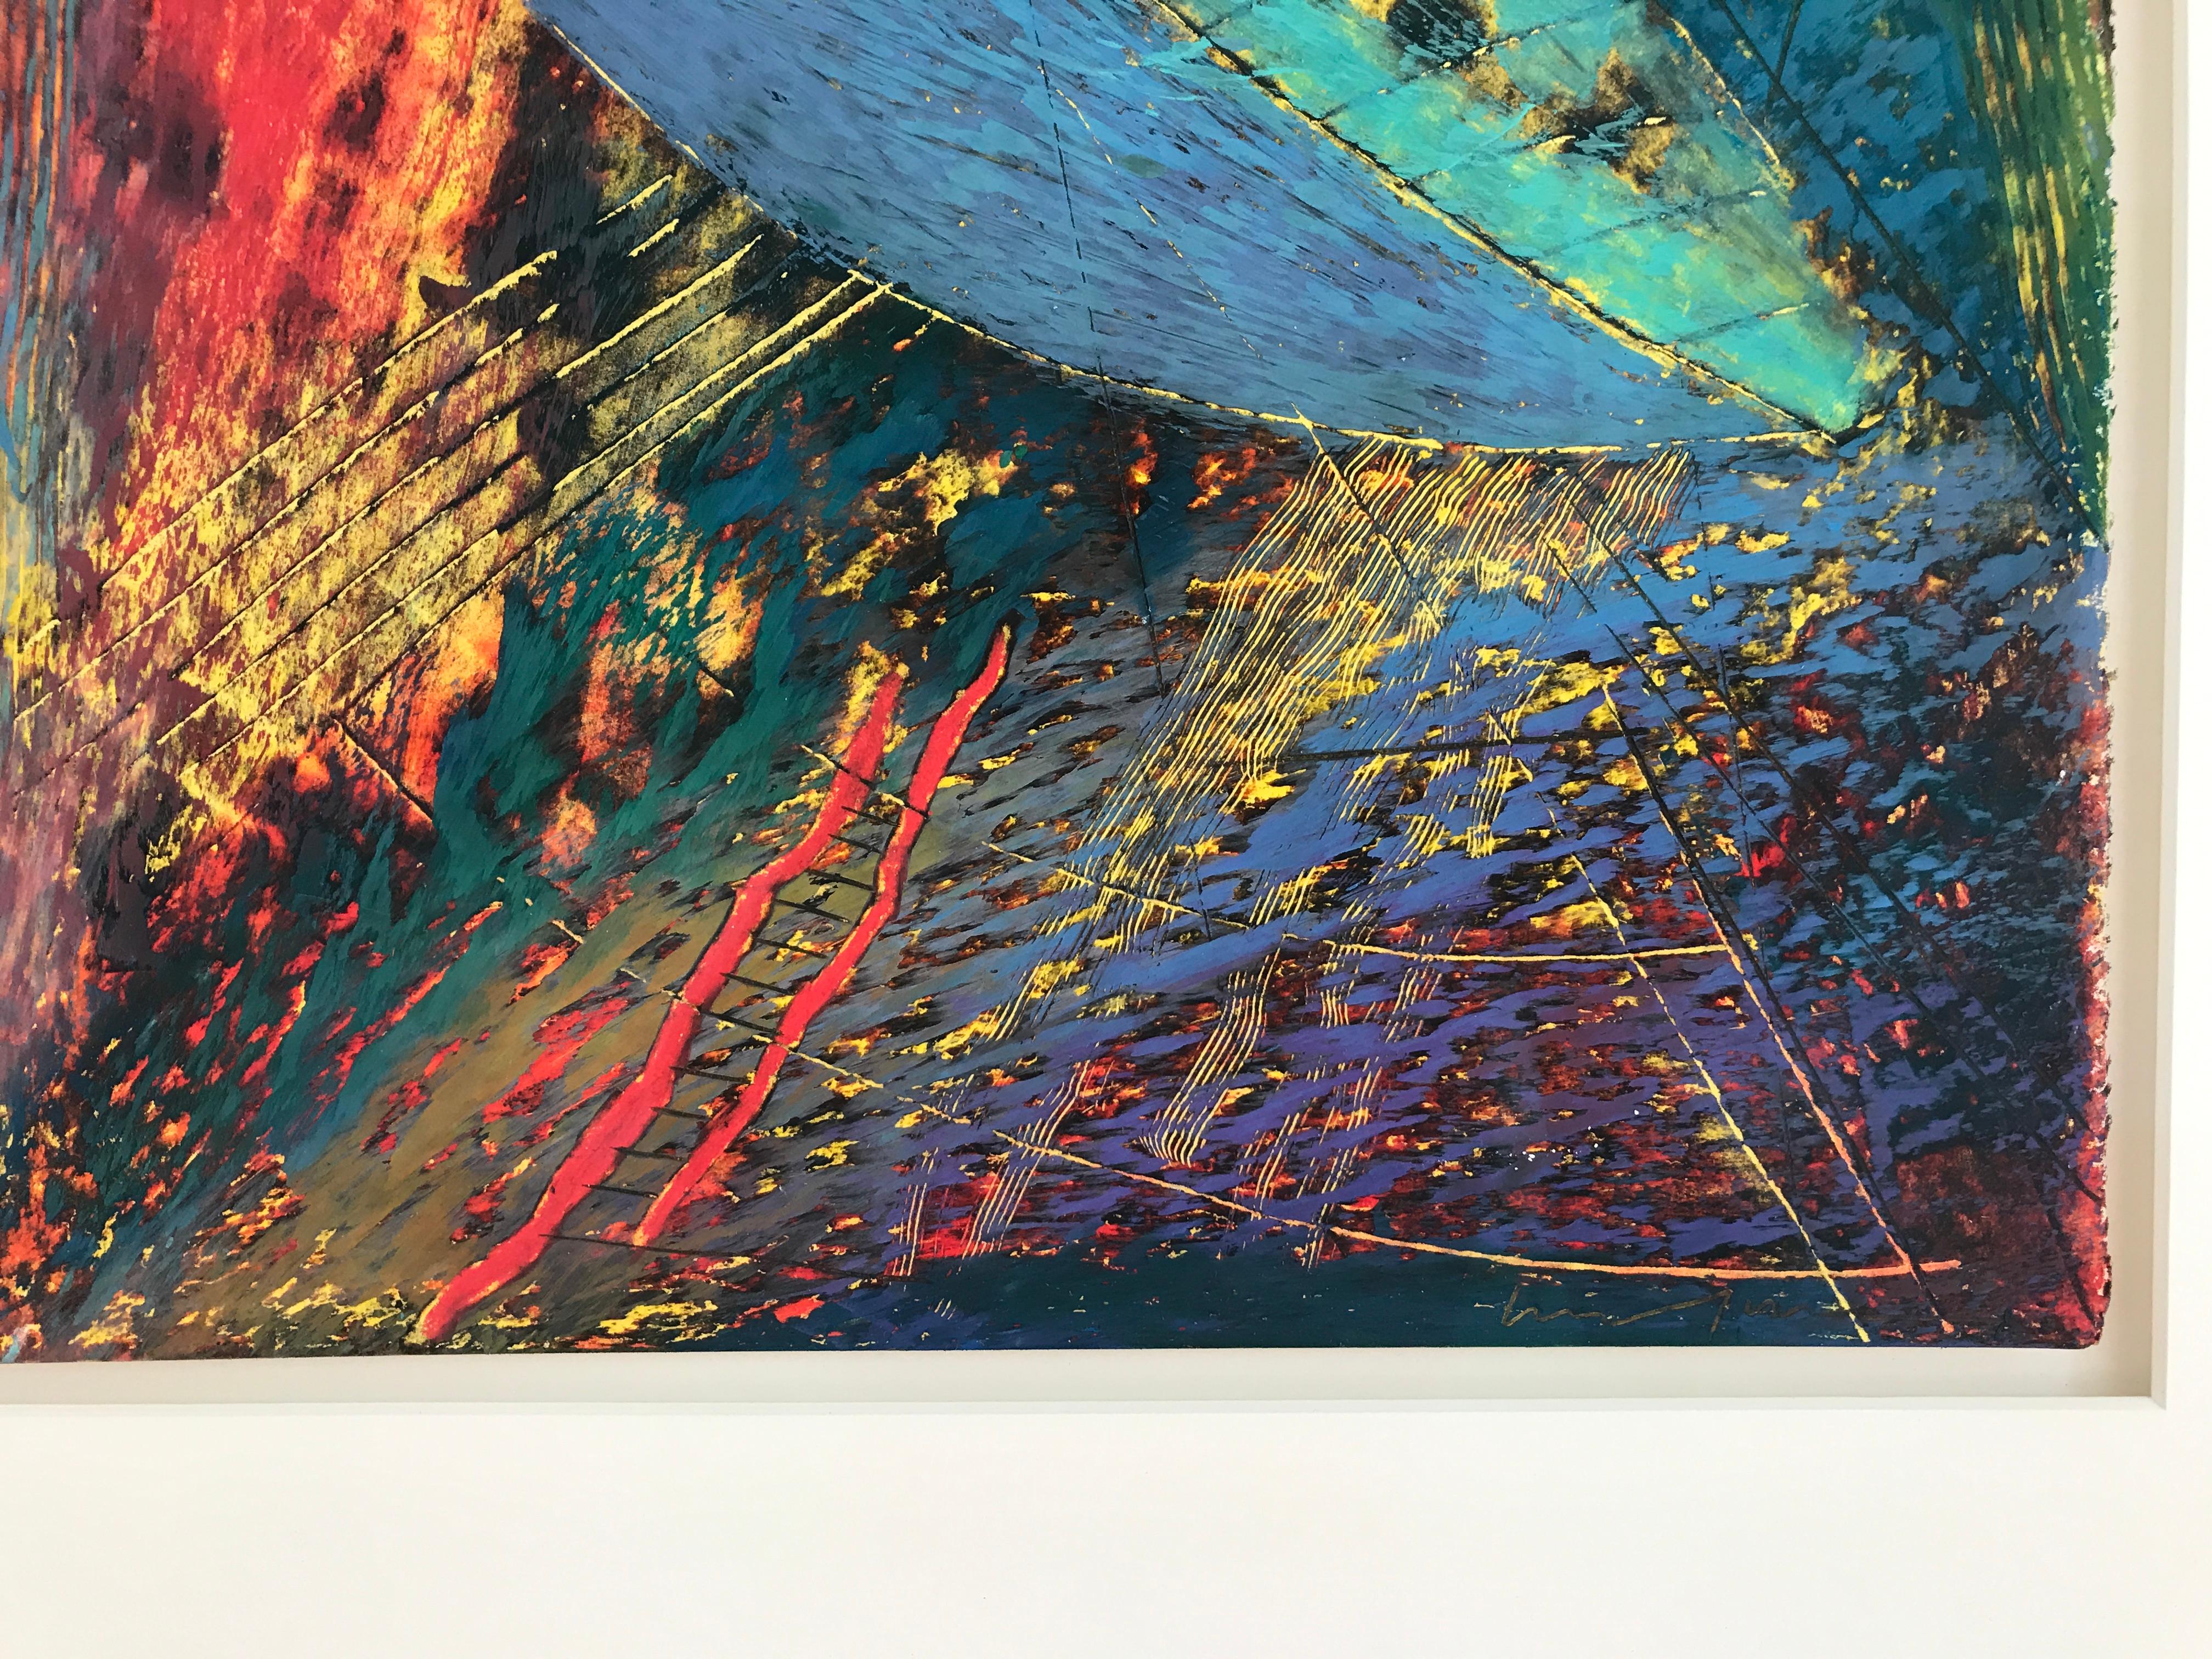 Herb Jackson merges the resonance of classical painting with the energy of Abstract Expressionism in his richly colored and textured abstractions. Jackson’s compositions have an organic look—suggesting, perhaps, cross-sections of geological strata